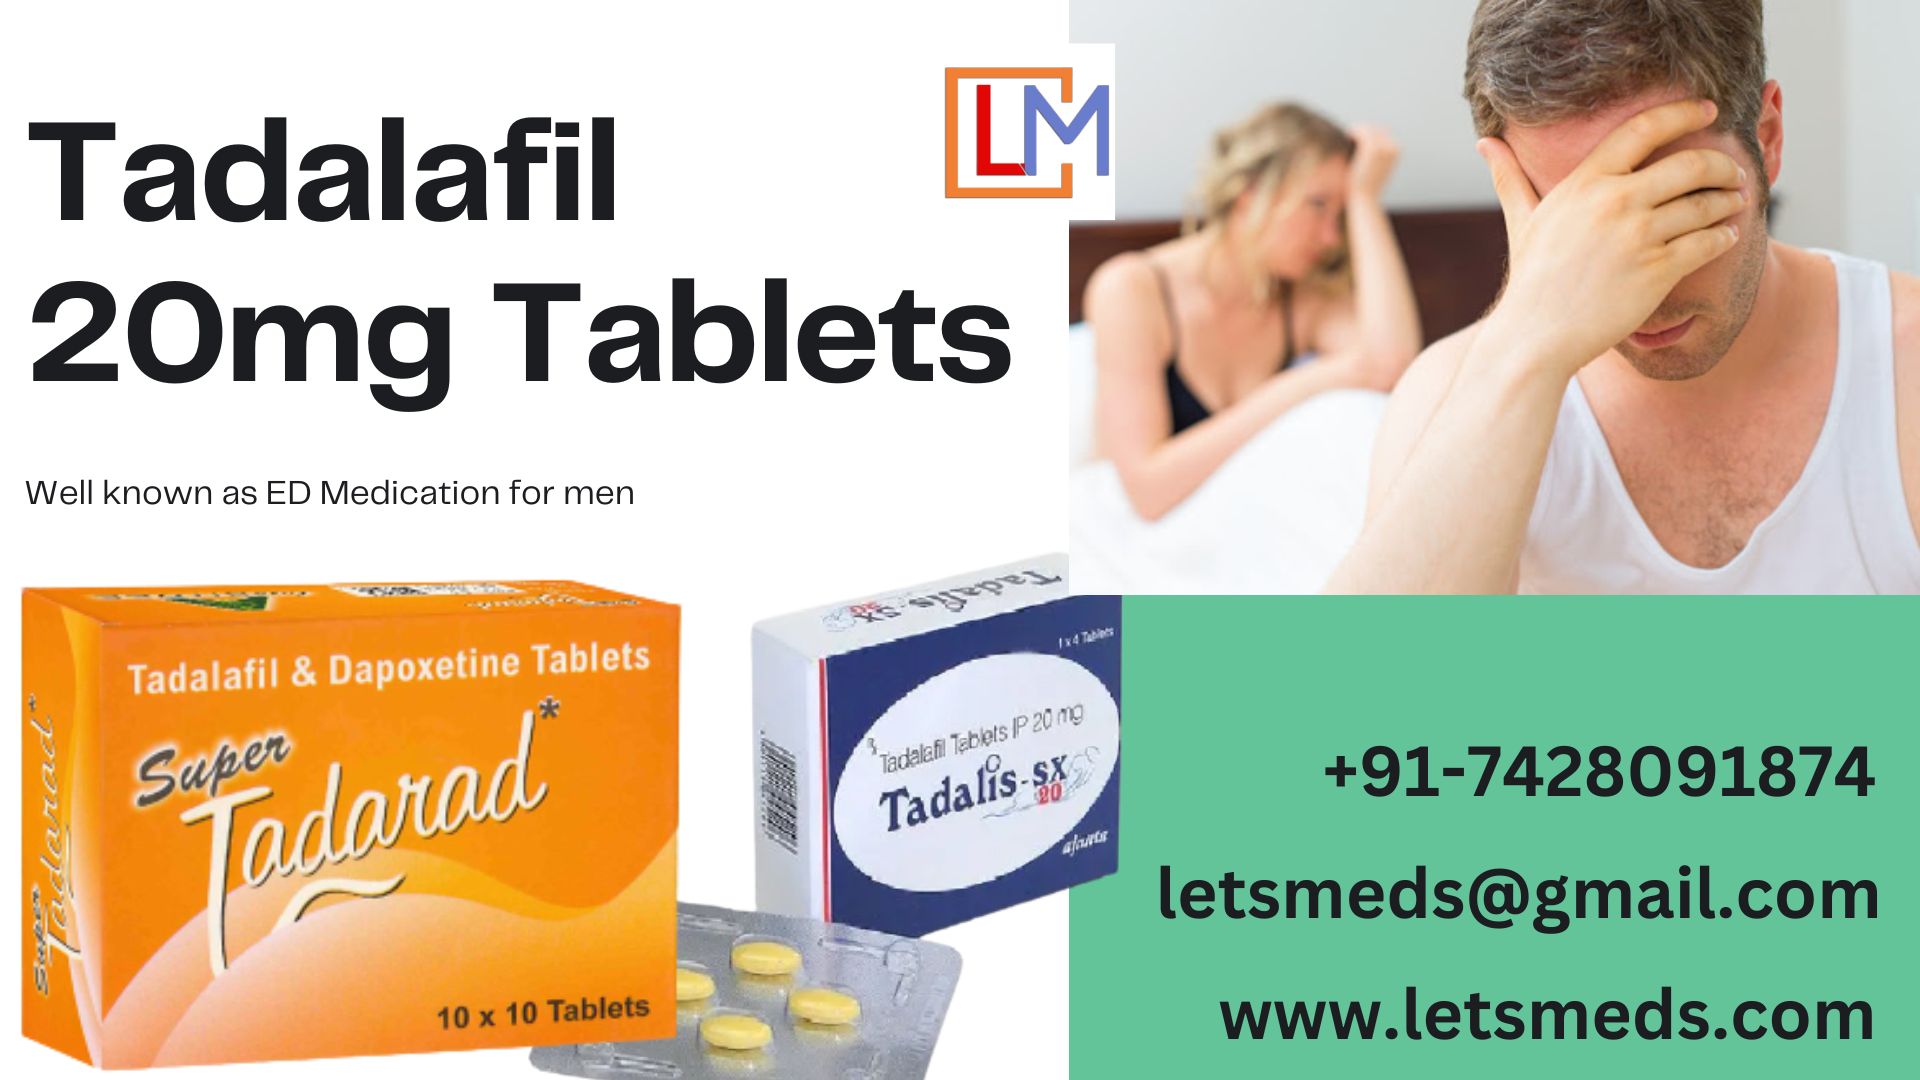 Buy Original Tadalafil 20mg Tablets Online from India รูปที่ 1